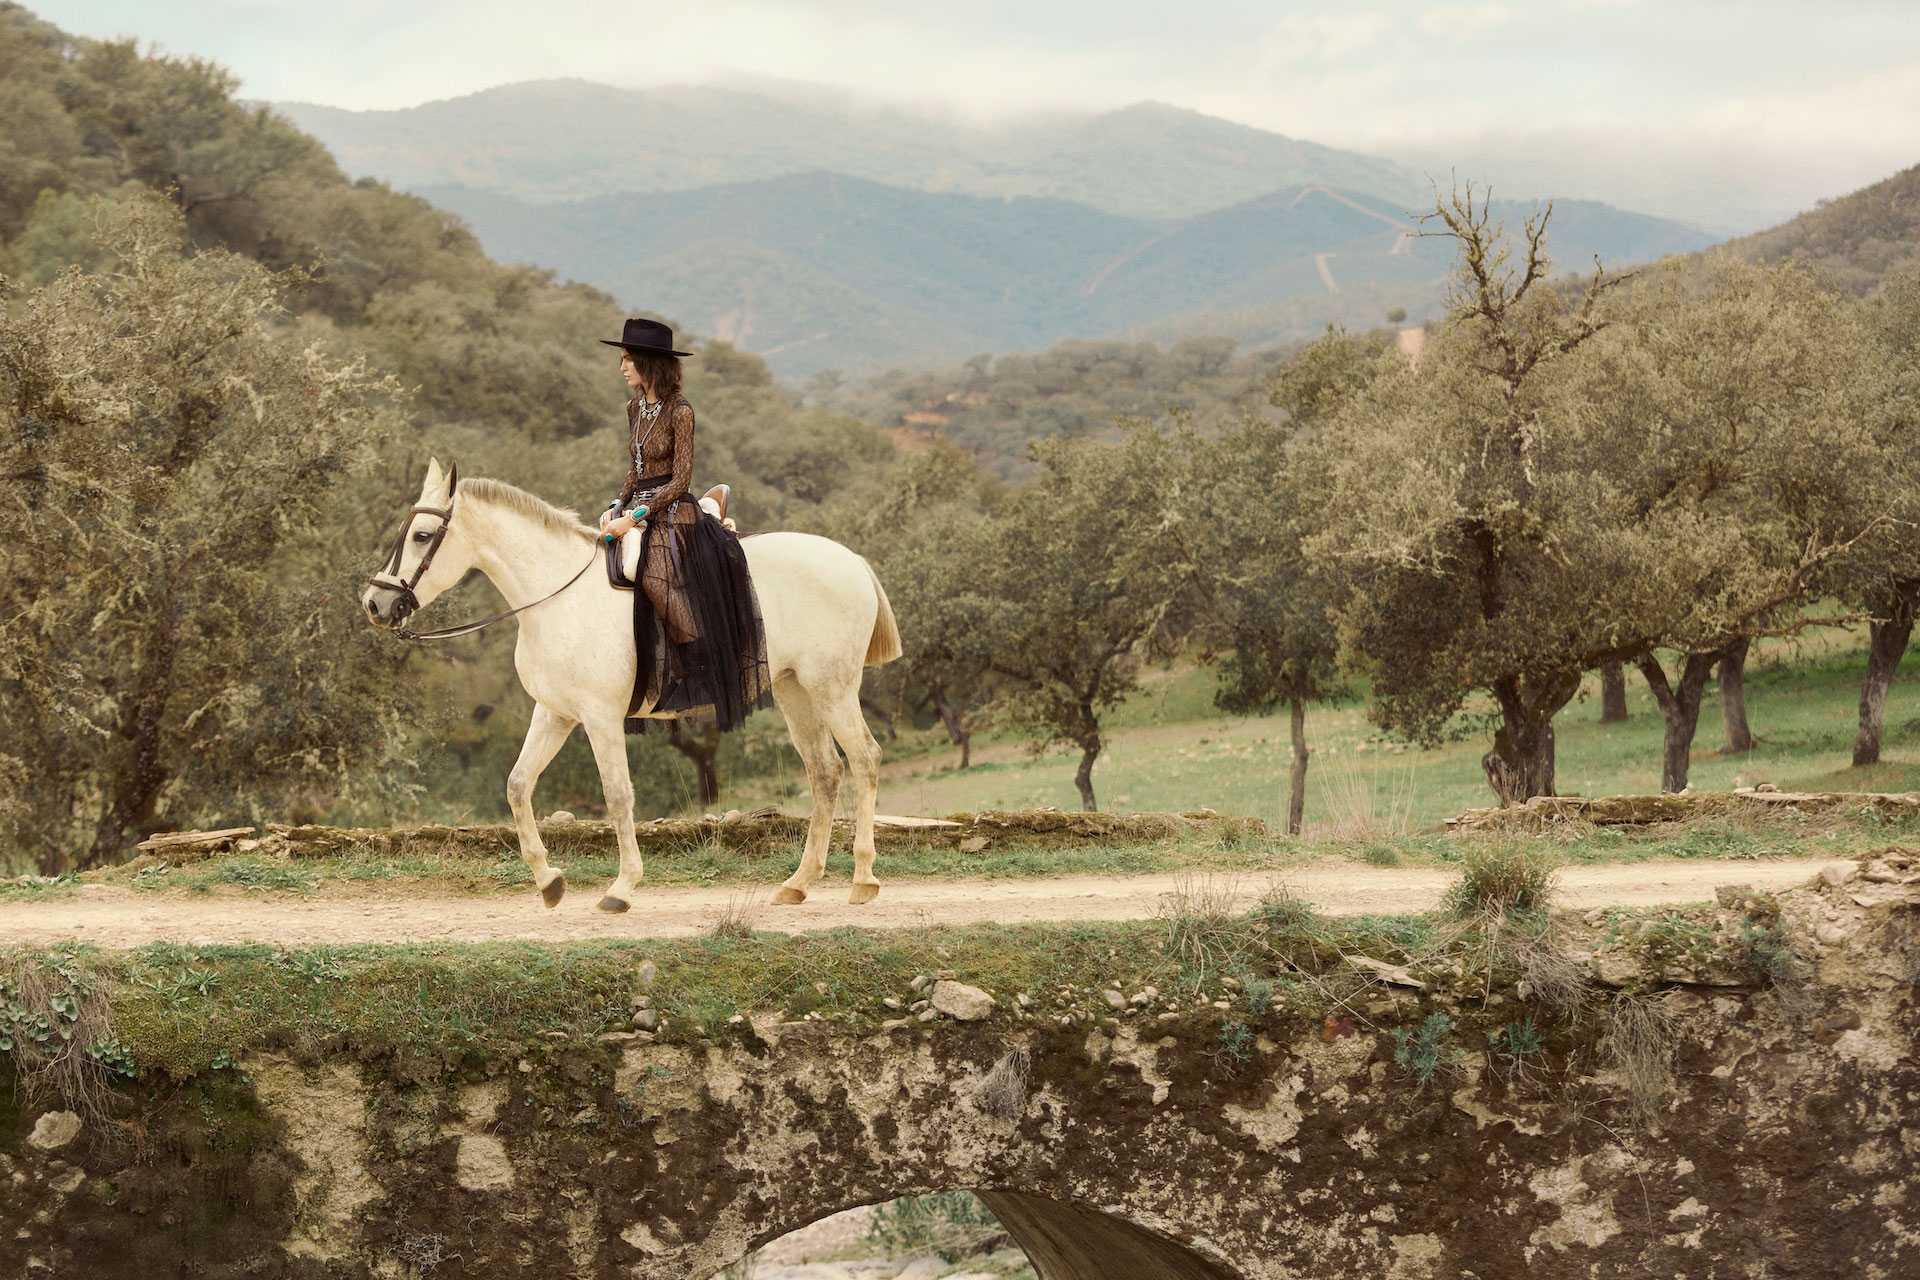 On the Cover: Style in the Saddle at Caballo de Hiero